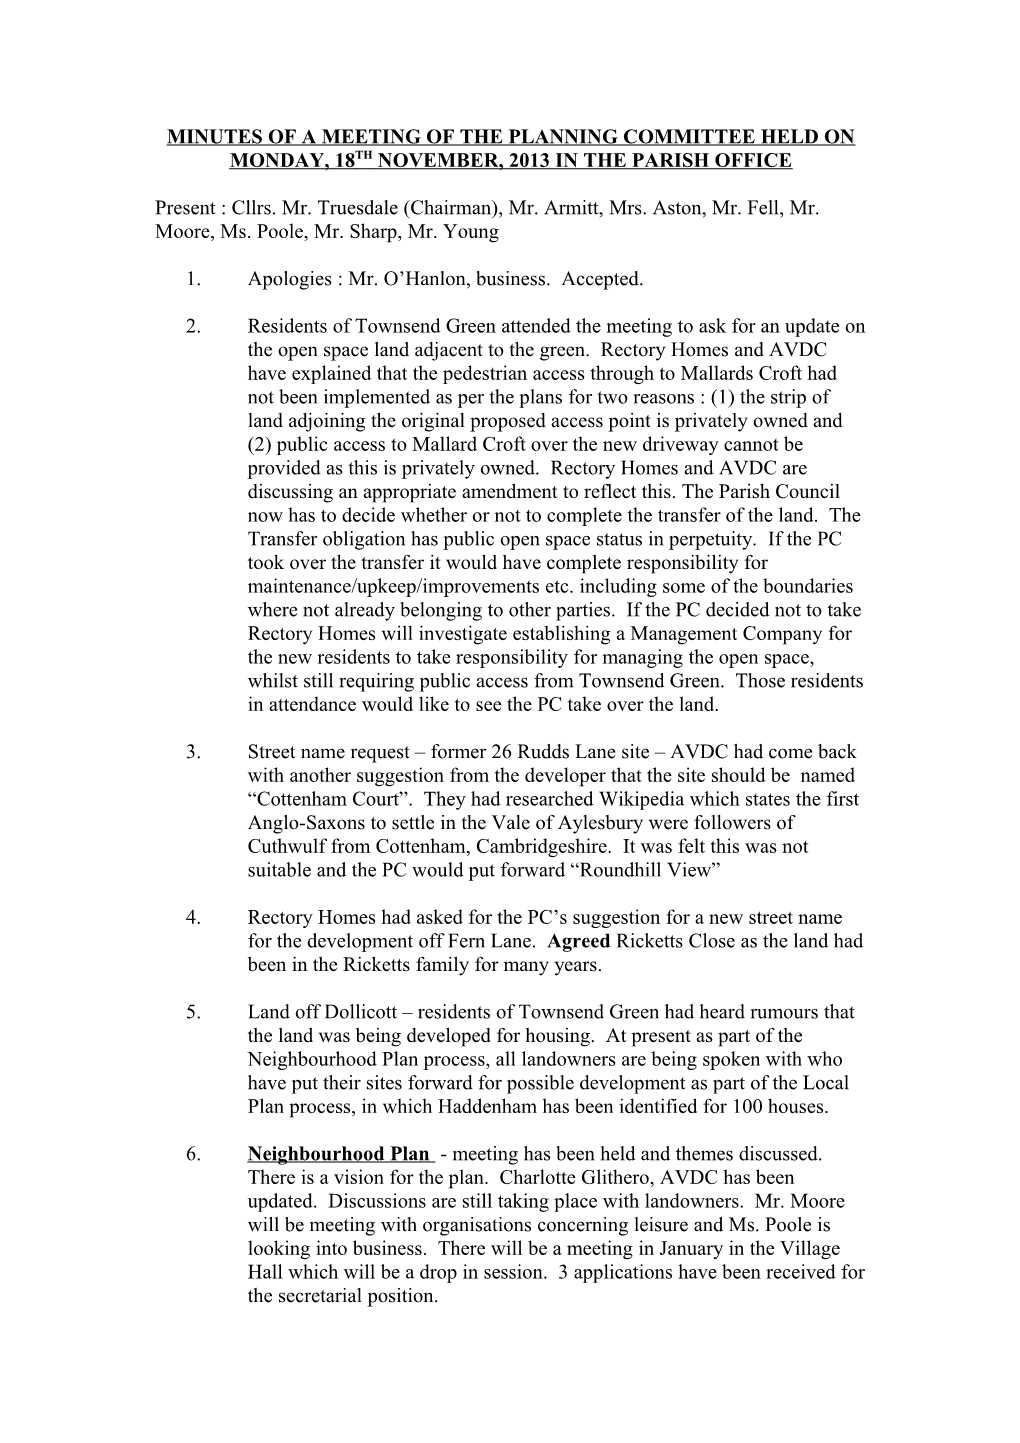 Minutes of a Meeting of the Planning Committee Held on Monday, 18Th November, 2013 in The